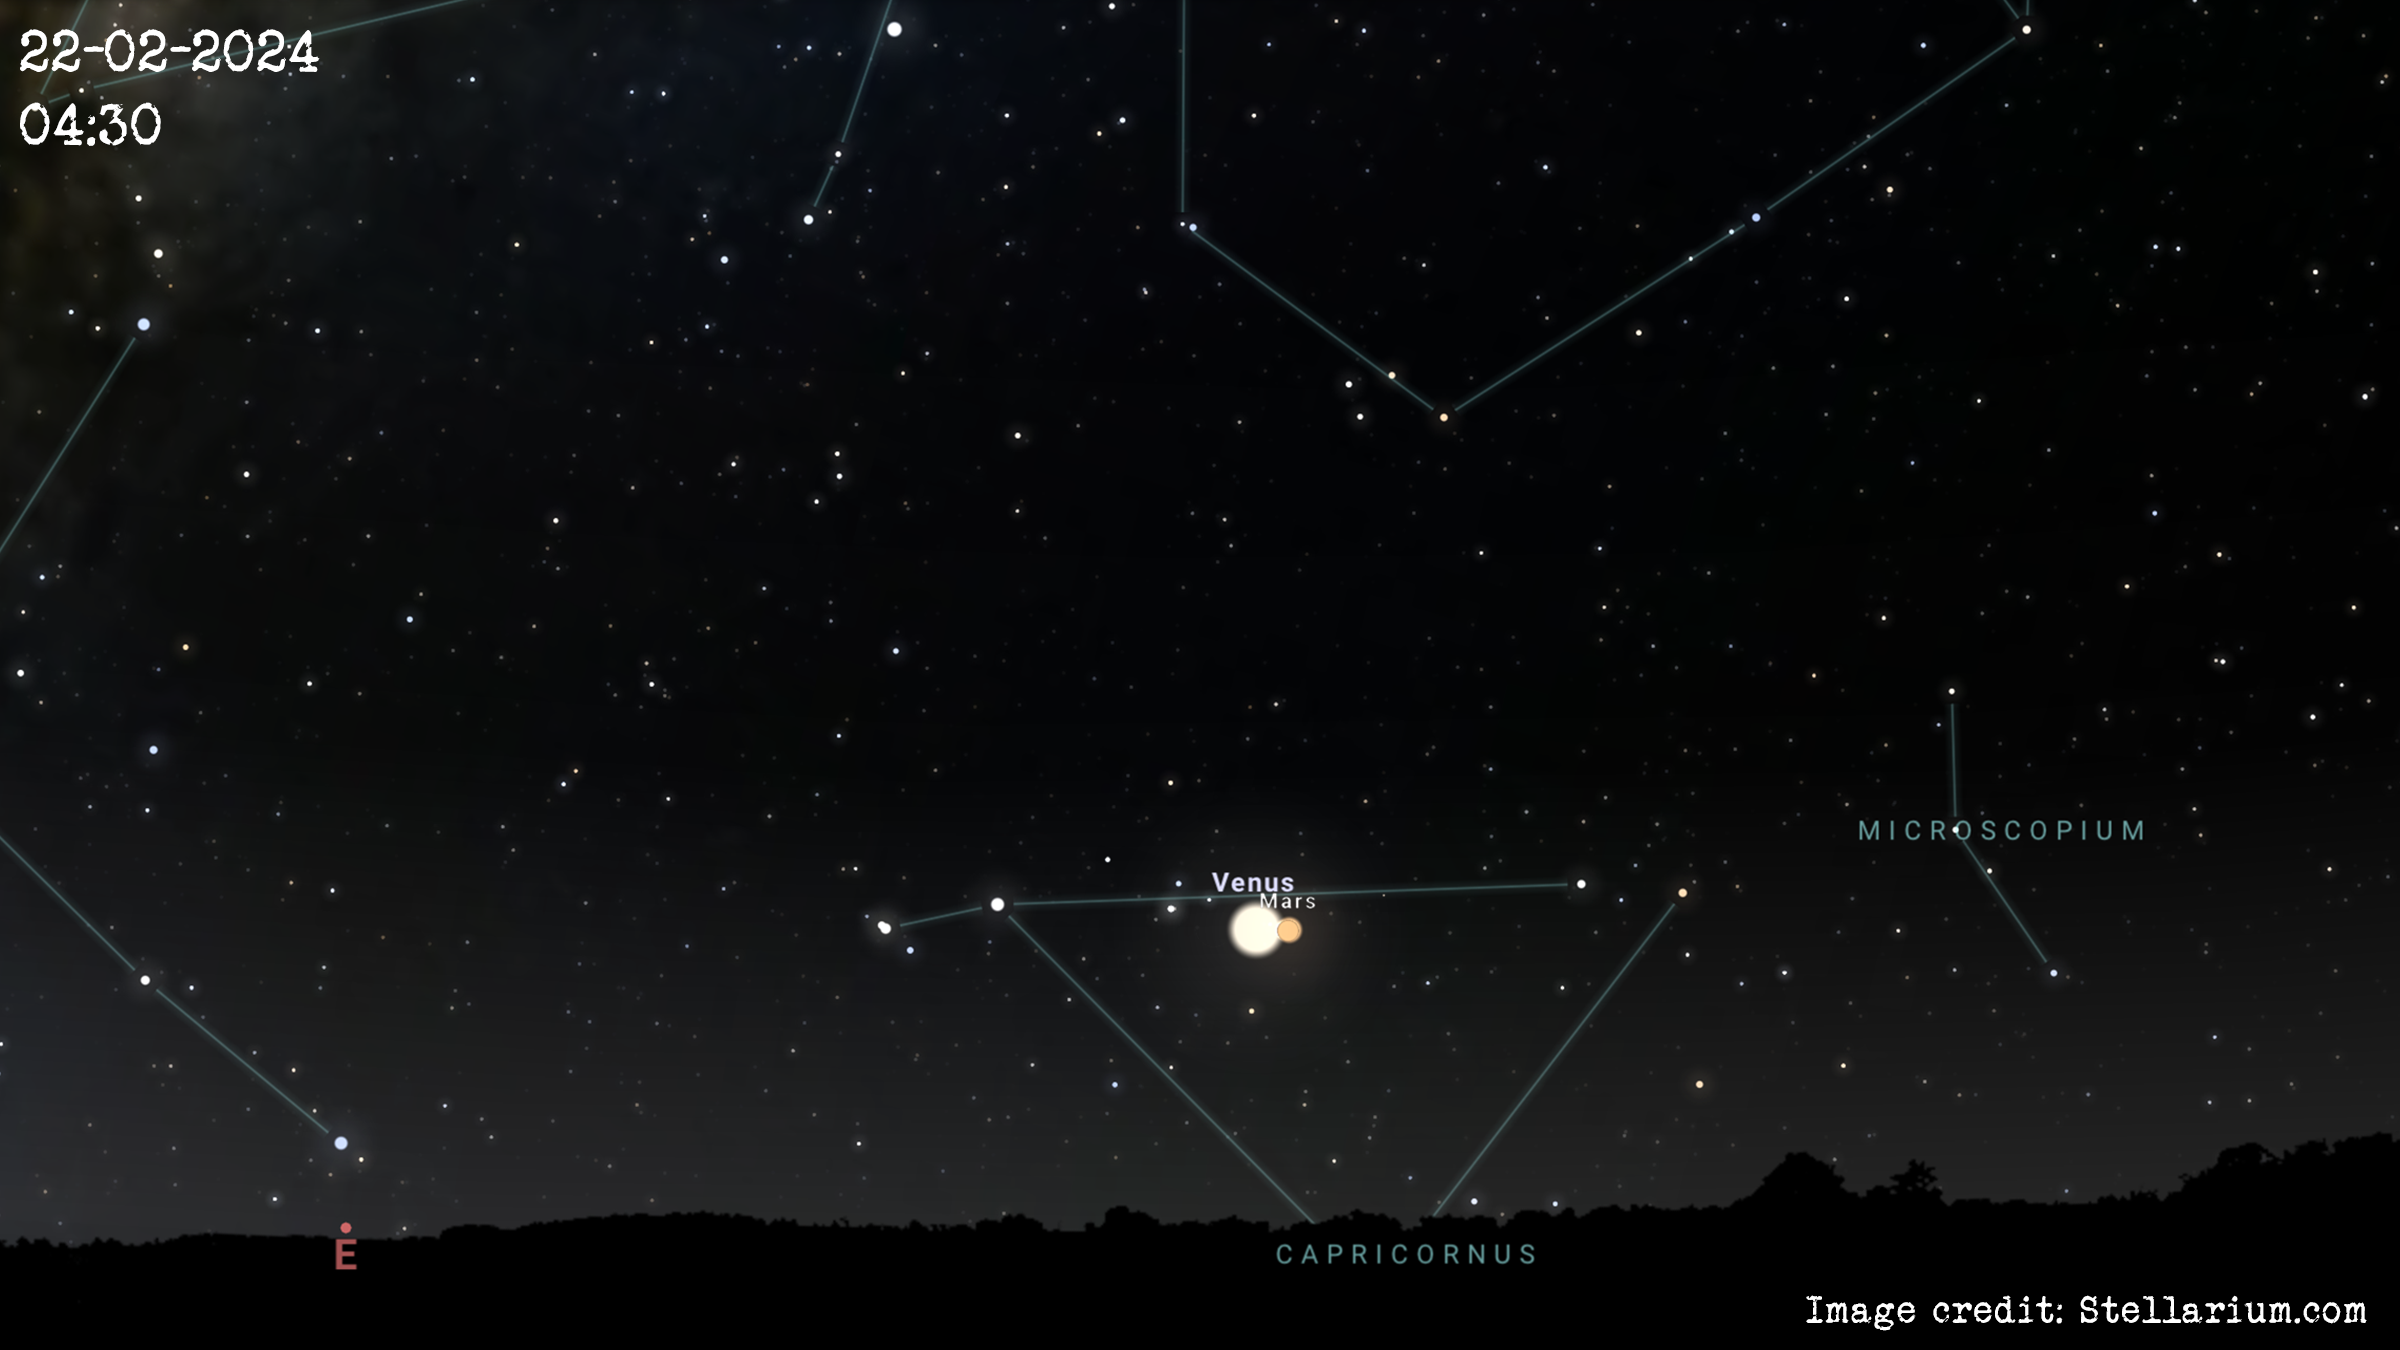 Image shows a view of the night sky from the website Stellarium.com, depicting a conjunction of Mars and Venus